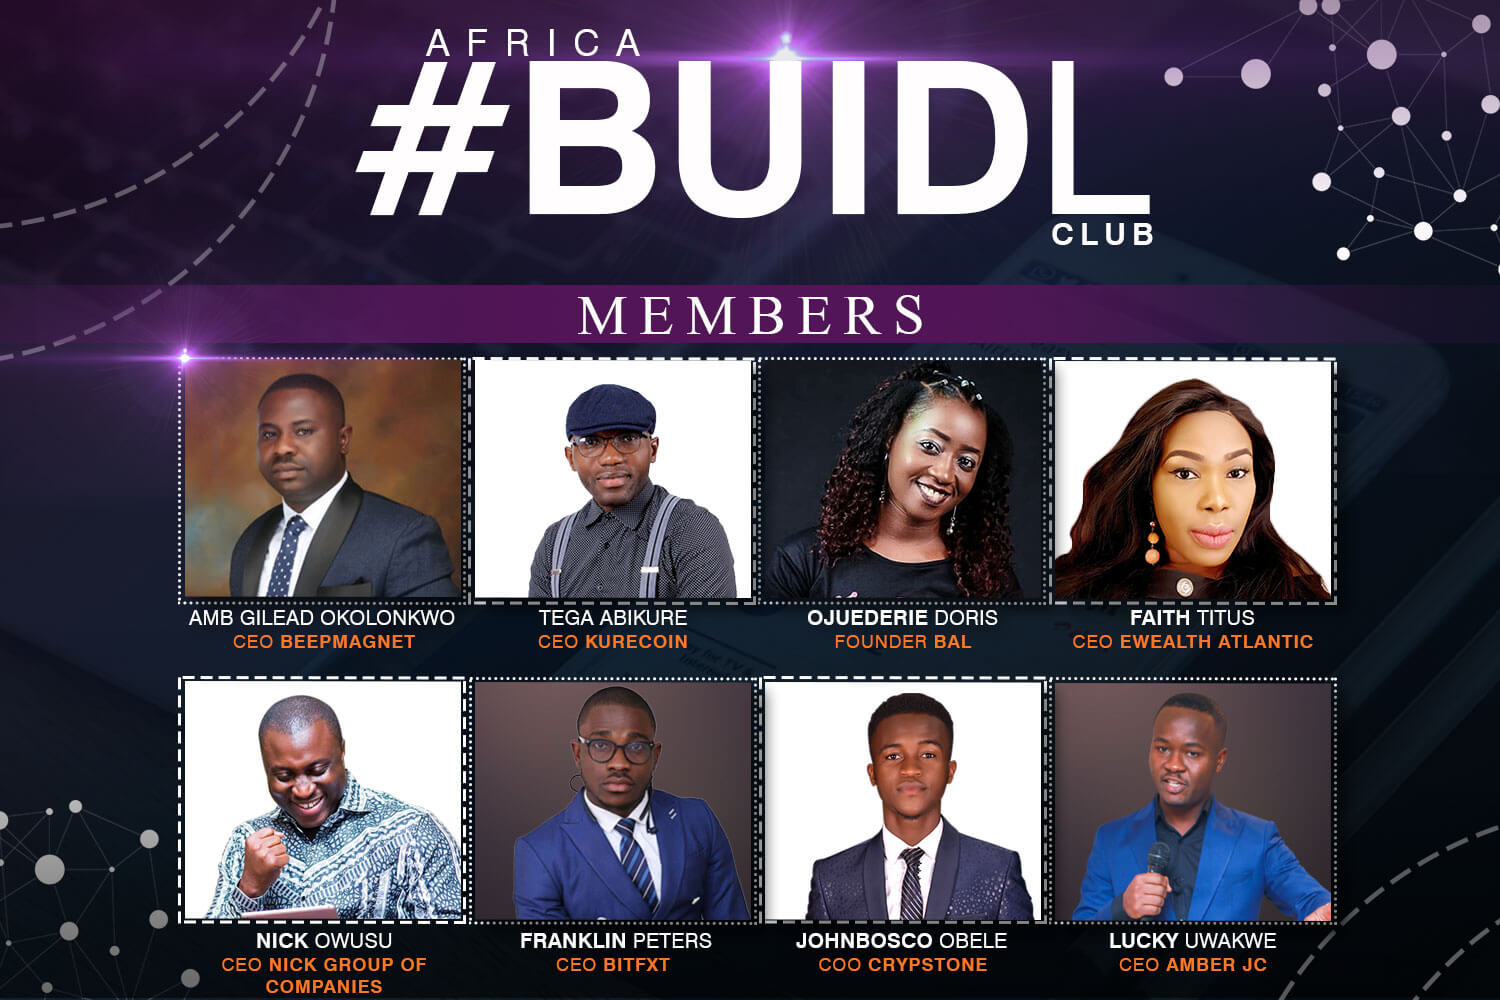 A cross sessions of Buidl Club Members